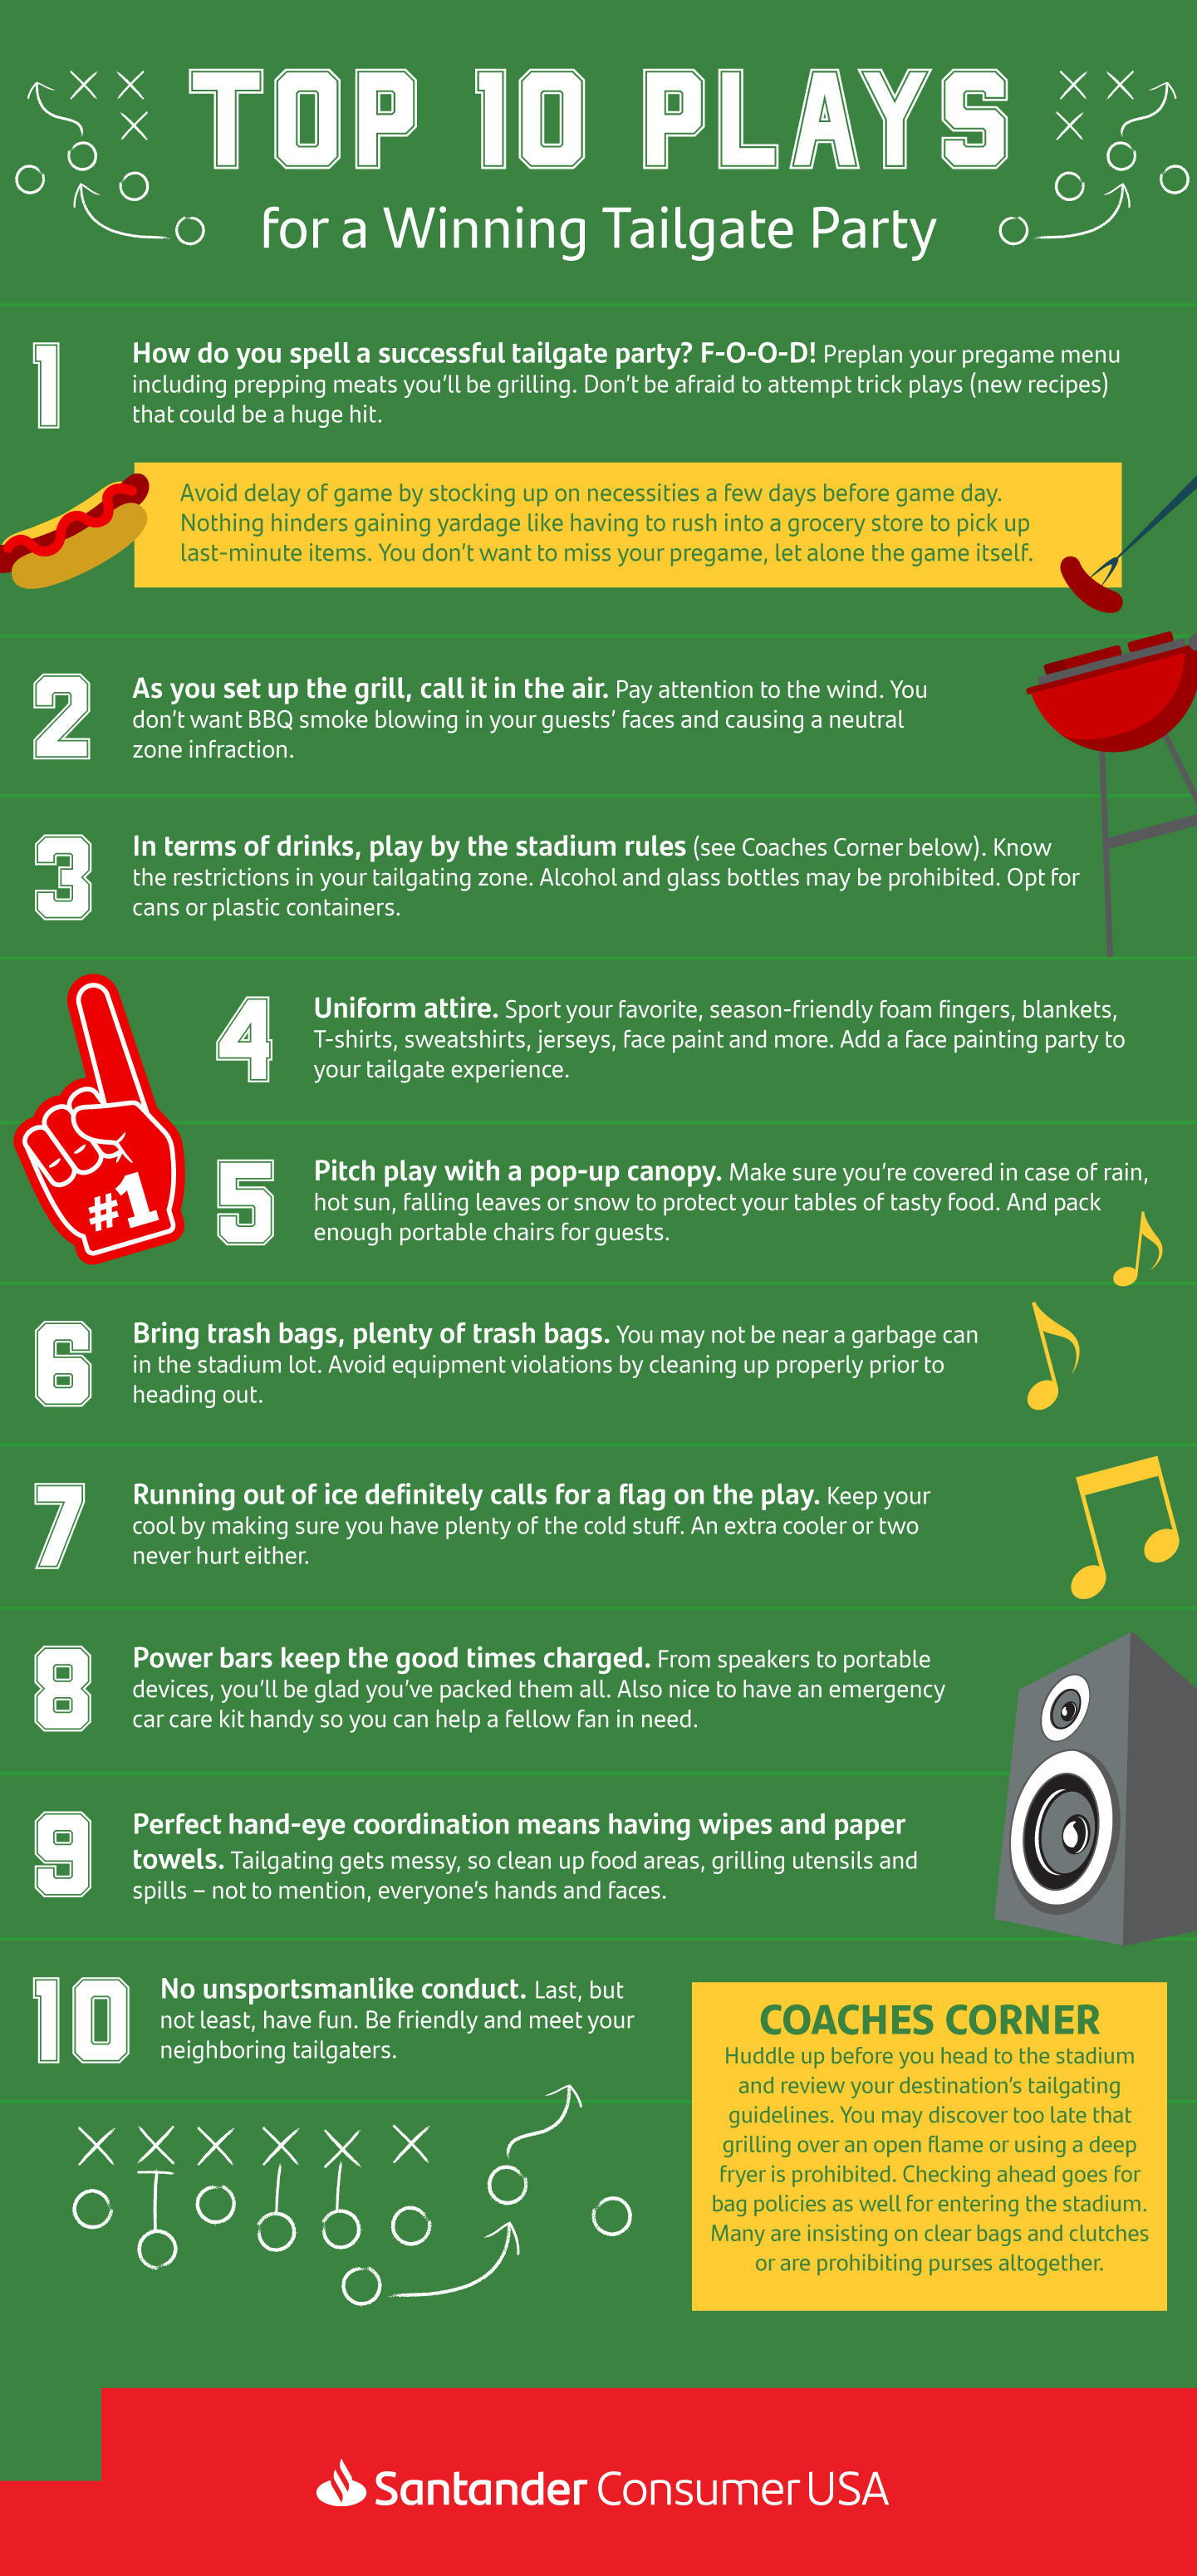 Infographic listing Top 10 Plays for a Winning Tailgate Party